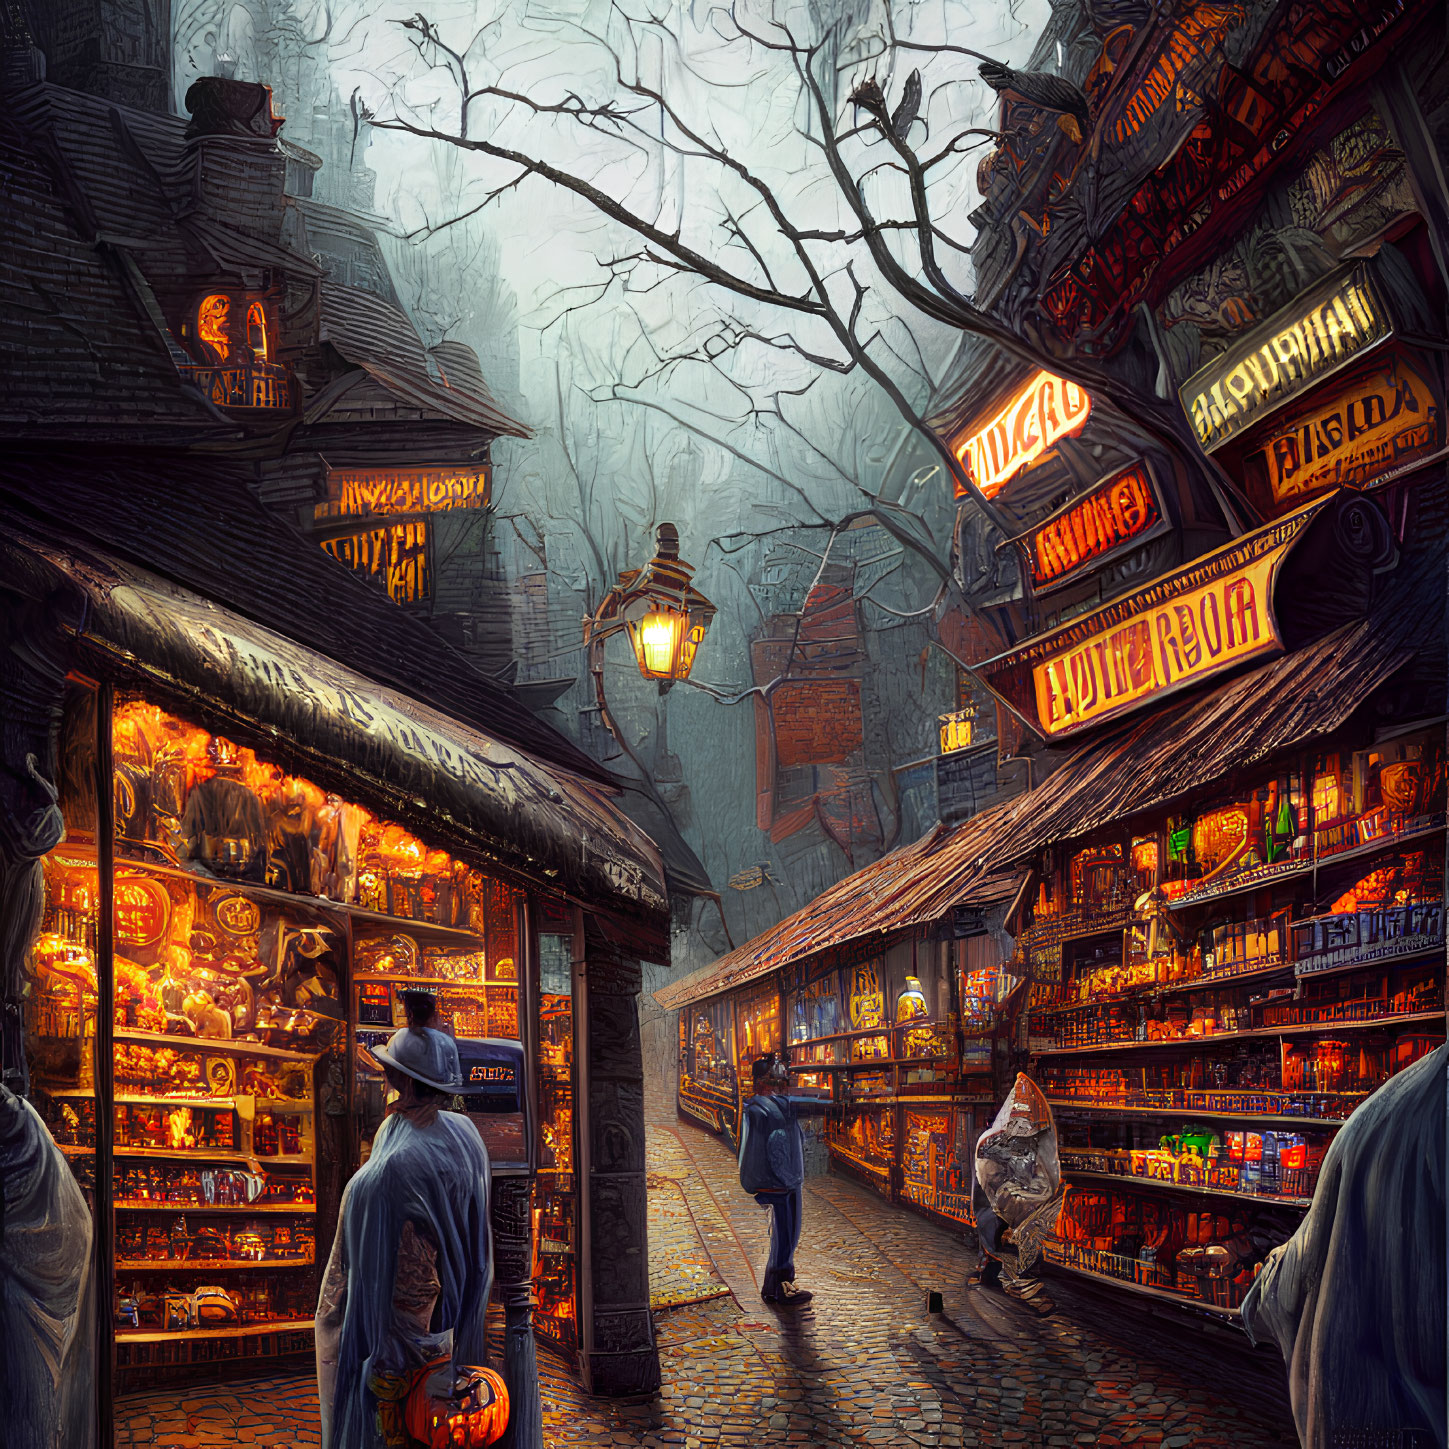 Detailed illustration of old-fashioned street at dusk with colorful shop signs, pedestrians, pumpkins, and bare